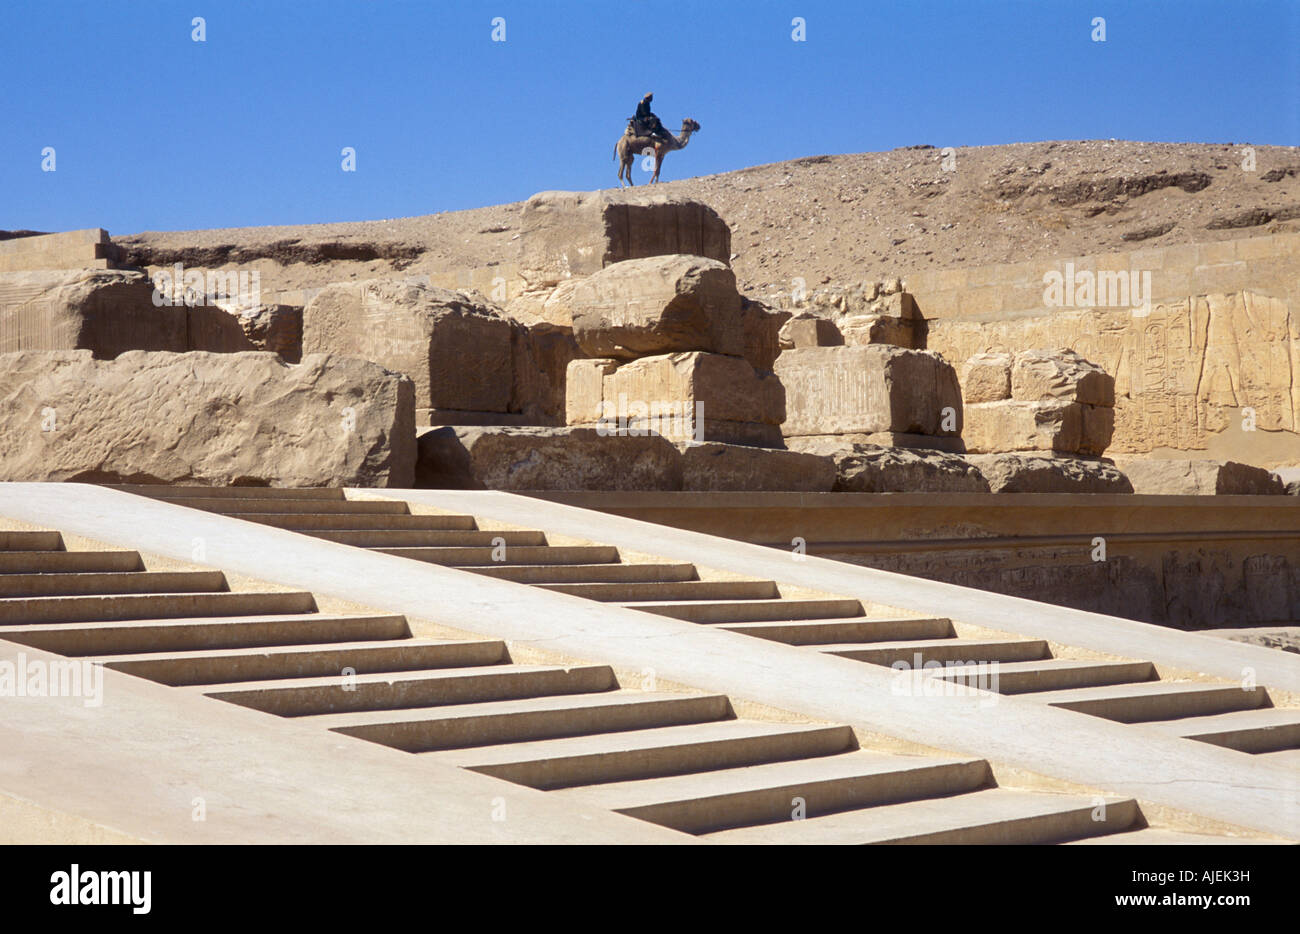 Man on Camel in Front of The Temple of Seti I in Abydos Stock Photo